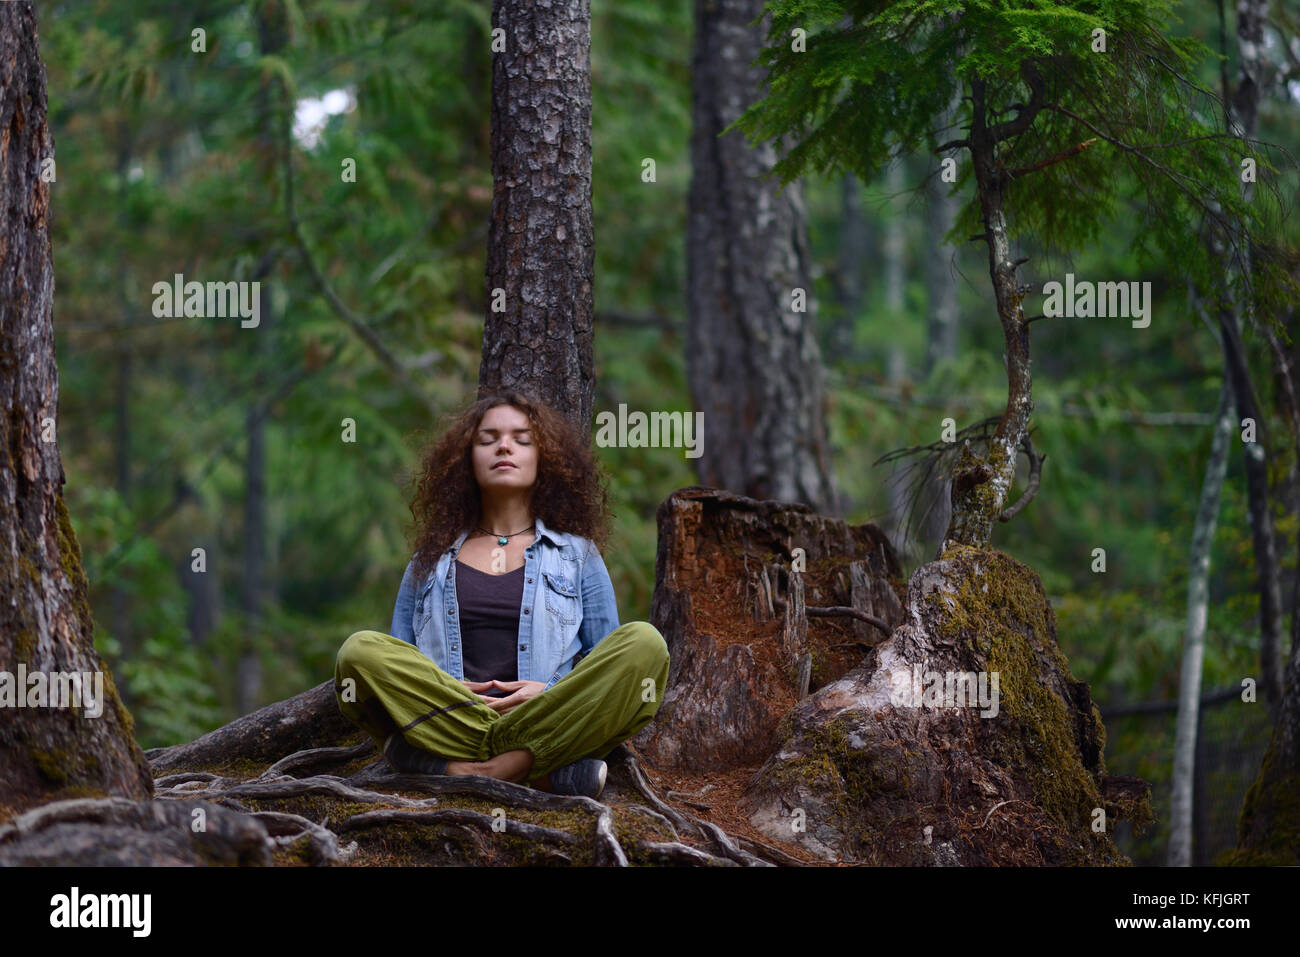 Young woman resting in a forest sitting in meditation posture leaning against a tree trunk in beautiful tranquil nature scenery Stock Photo